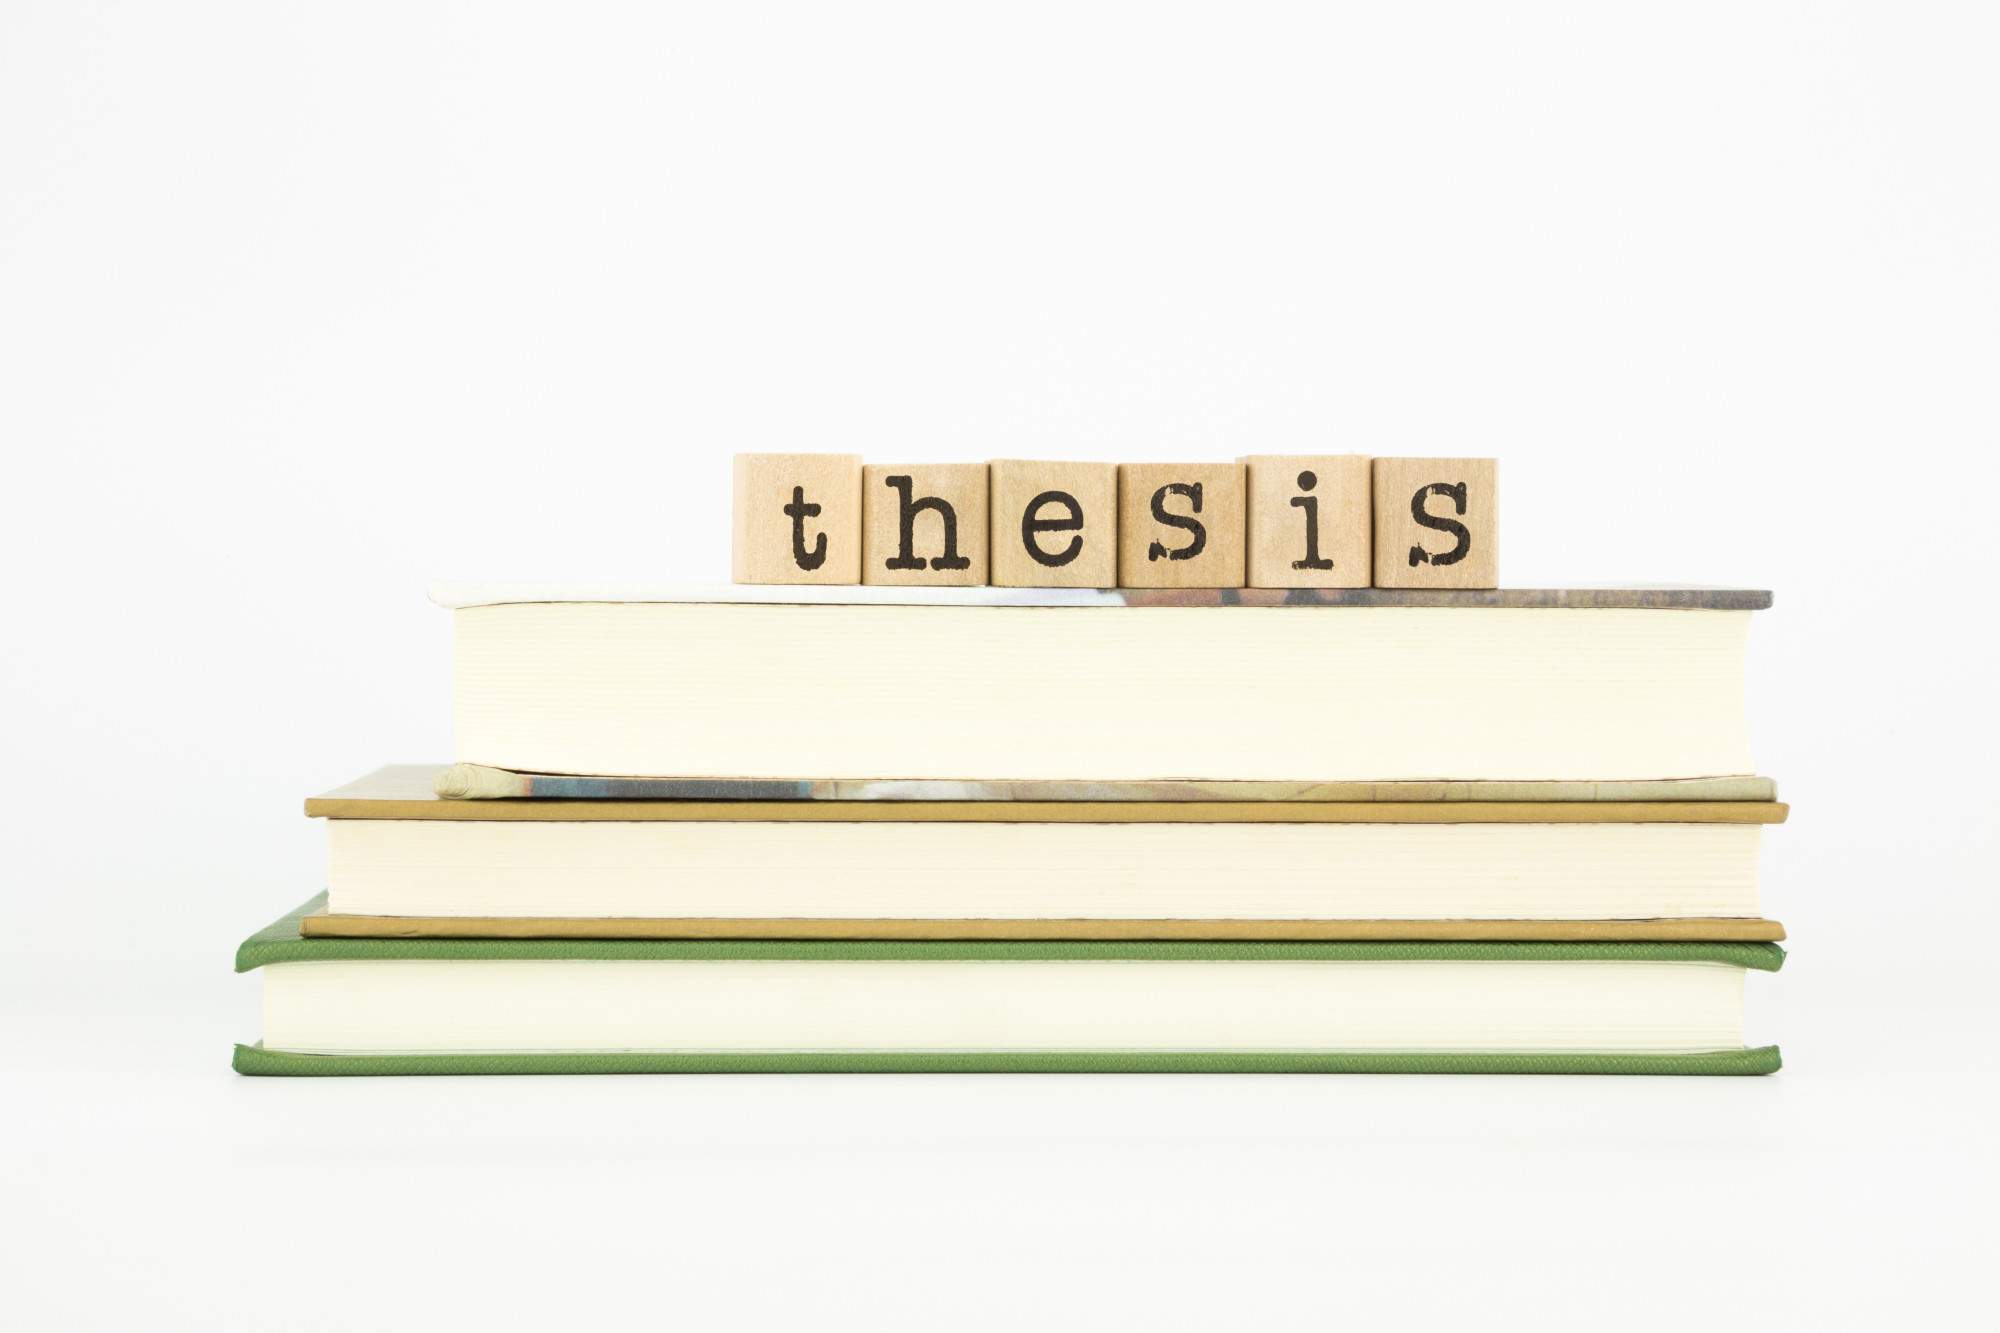 Thesis vs Dissertation: What Are the Differences?